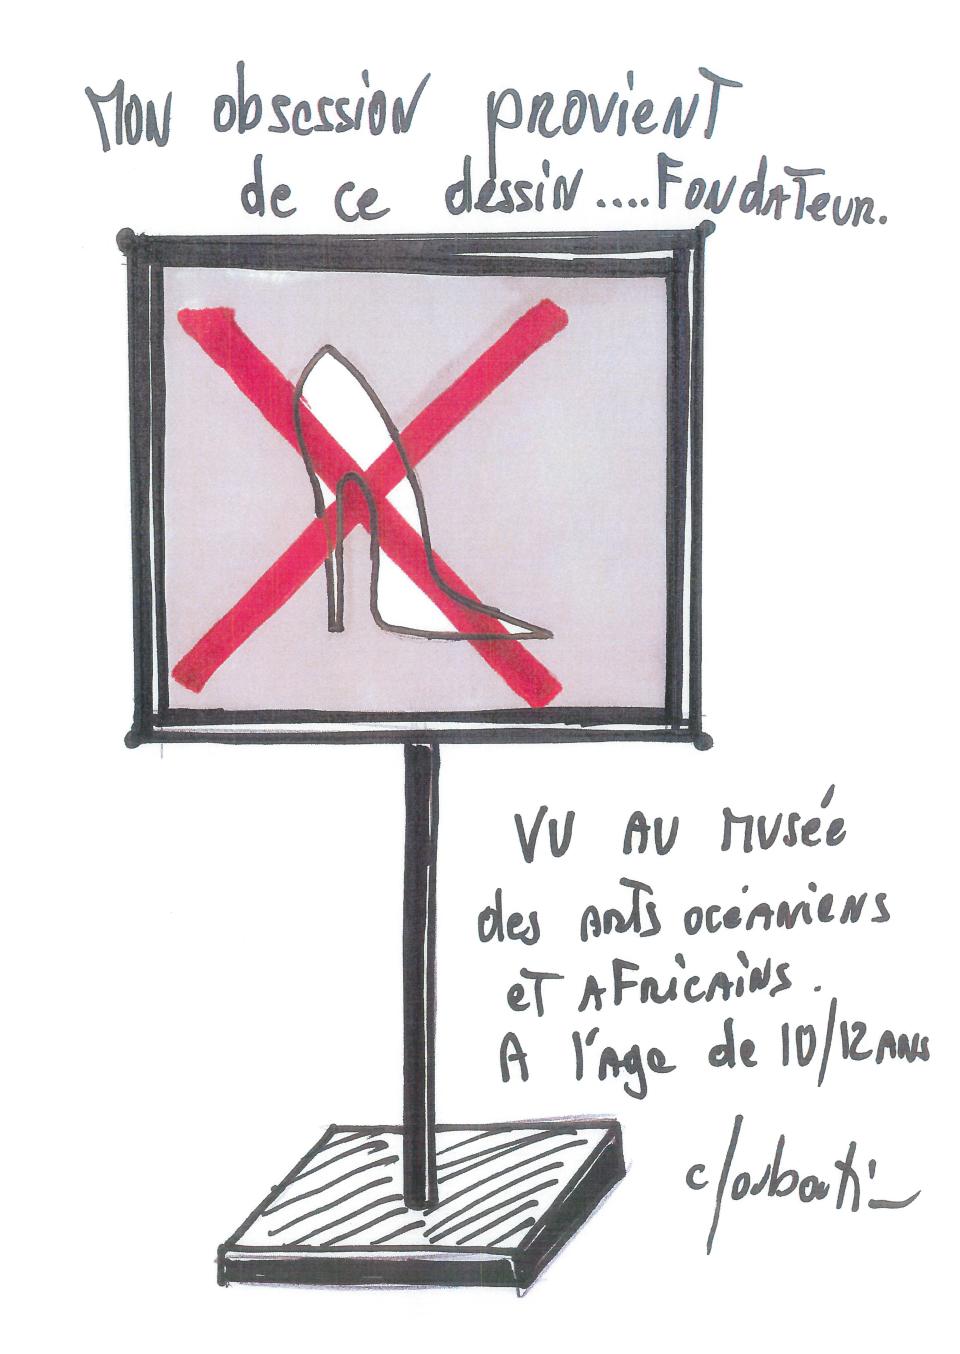 A re-creation of the sign he saw as a child, illustrated by Christian Louboutin. The text from top to bottom reads: “My obsession stems from this drawing; seen at the aquarium at the age of 10 or 12.”